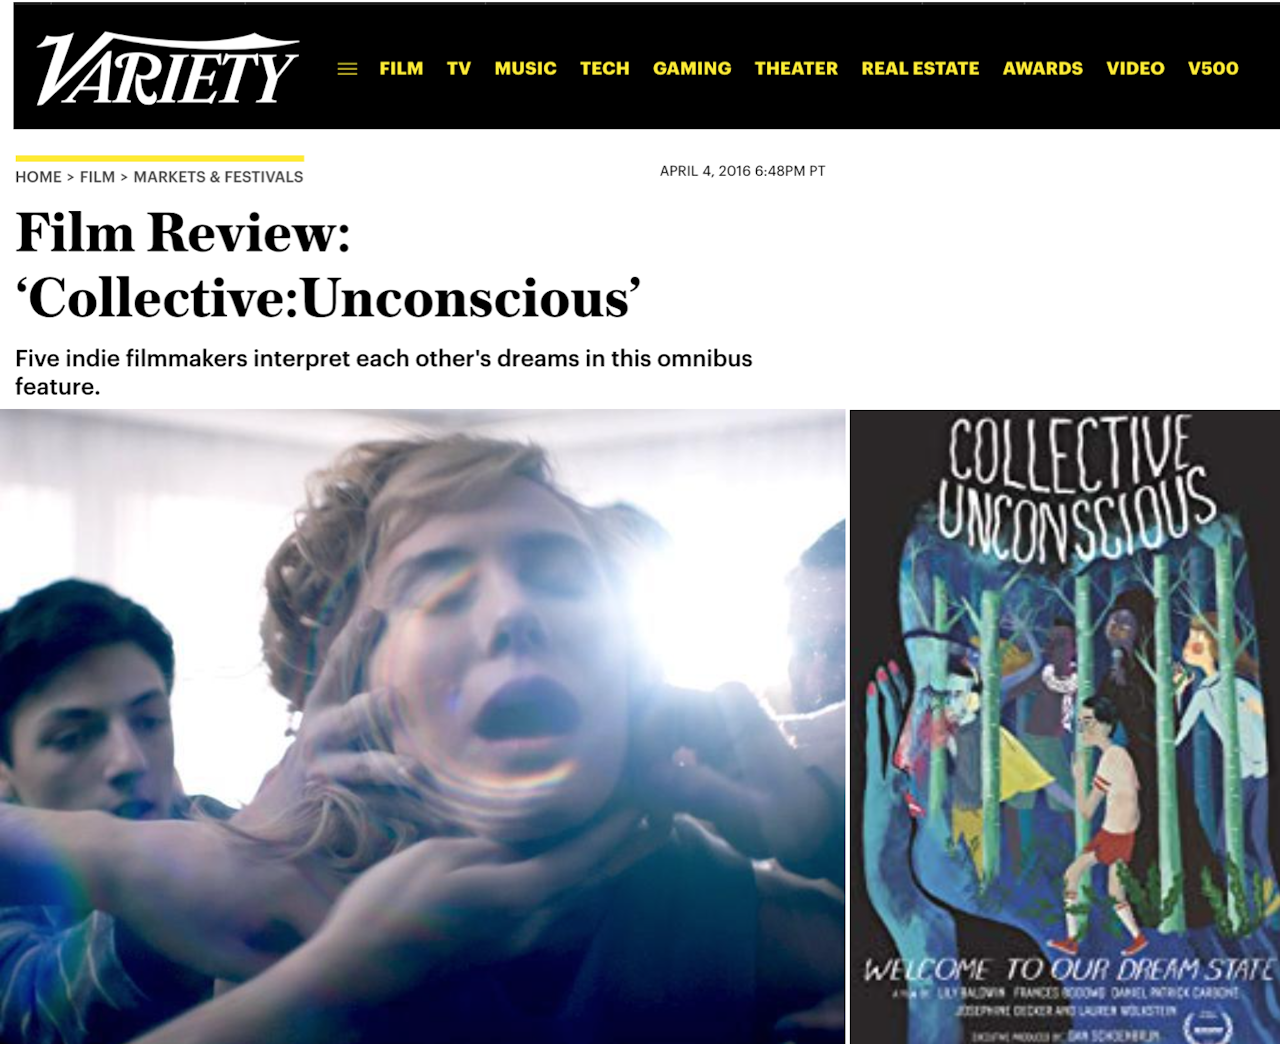 Variety on Collective:Unconscious